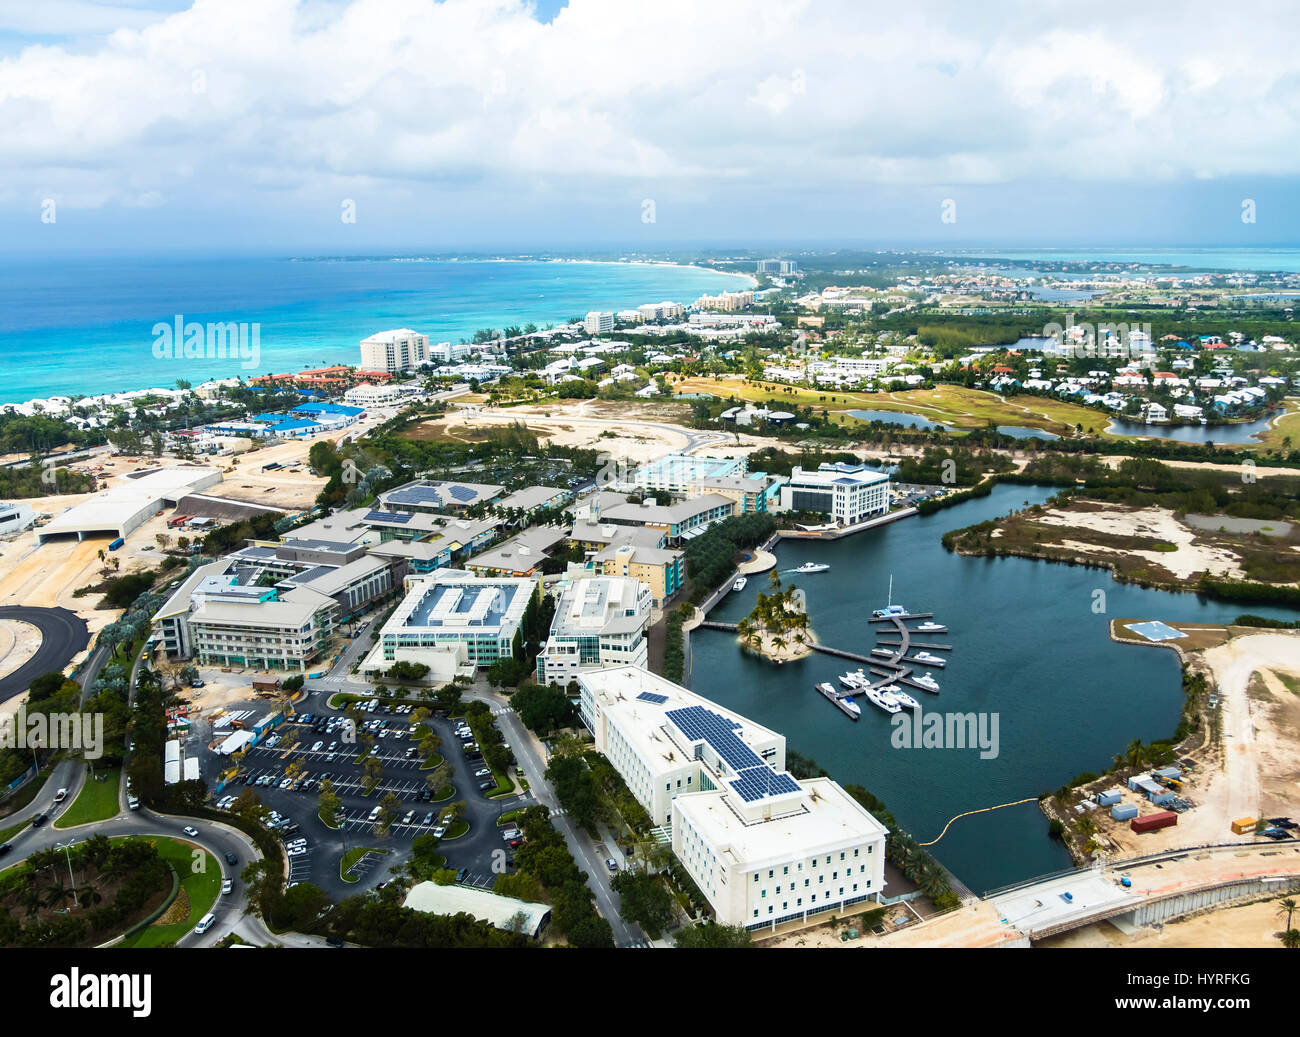 Business District and Marina, George Town, Grand Cayman, Caribbean, Cayman Islands Stock Photo